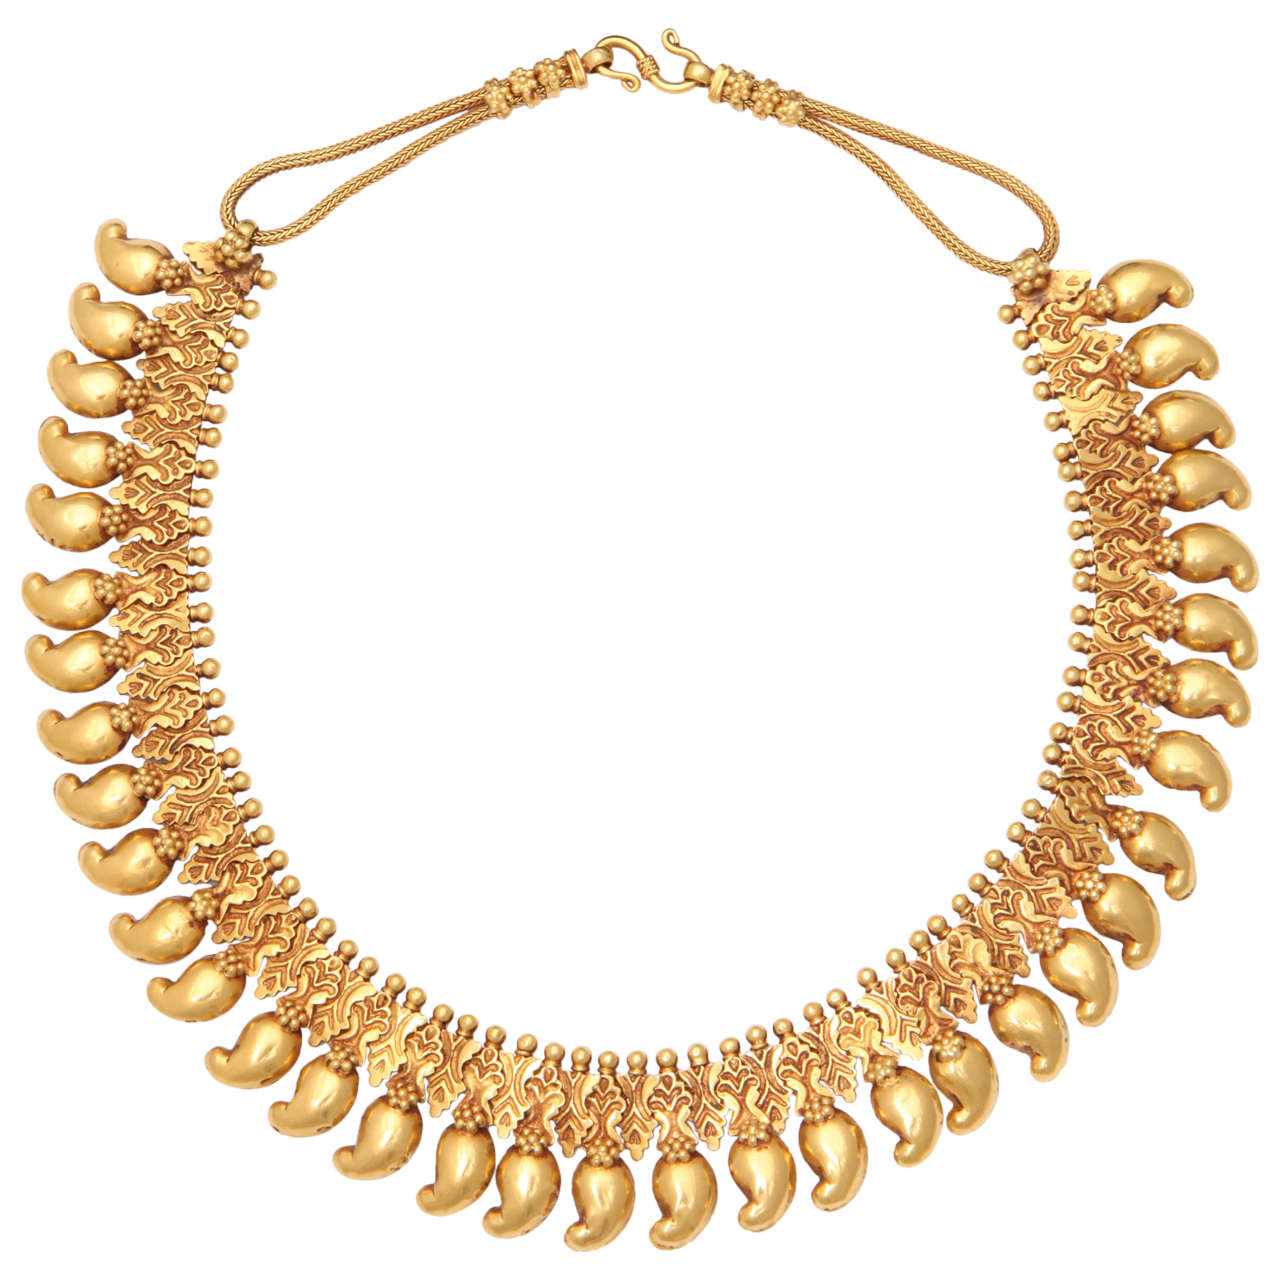 Sumptuous Indian Tribal Necklace